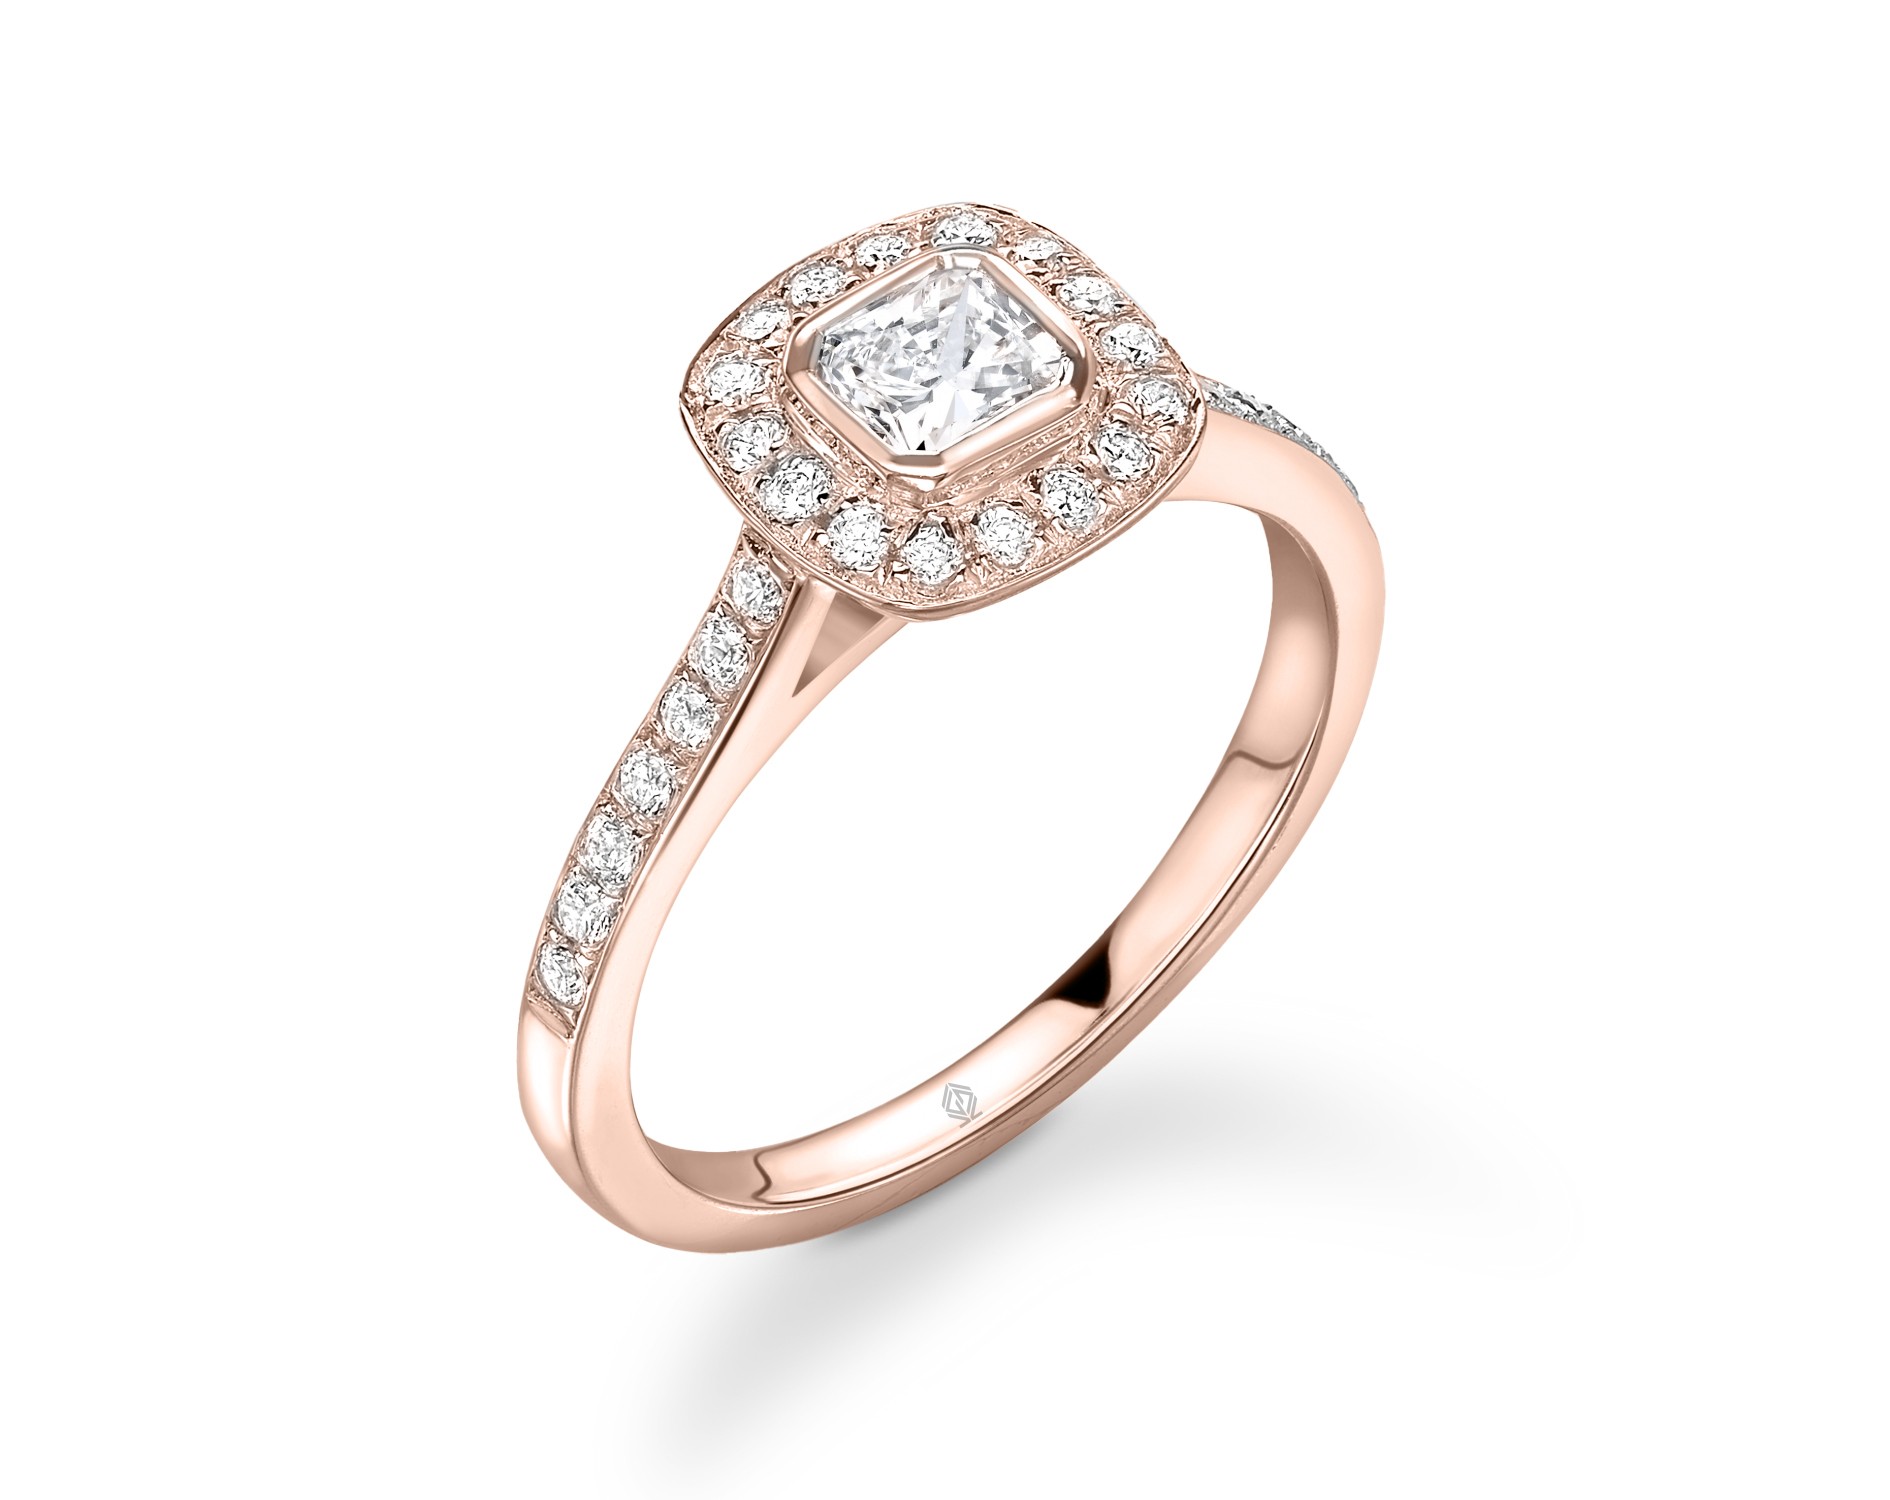 18K ROSE GOLD CUSHION CUT HALO DIAMOND ENGAGEMENT RING WITH SIDE STONES CHANNEL SET